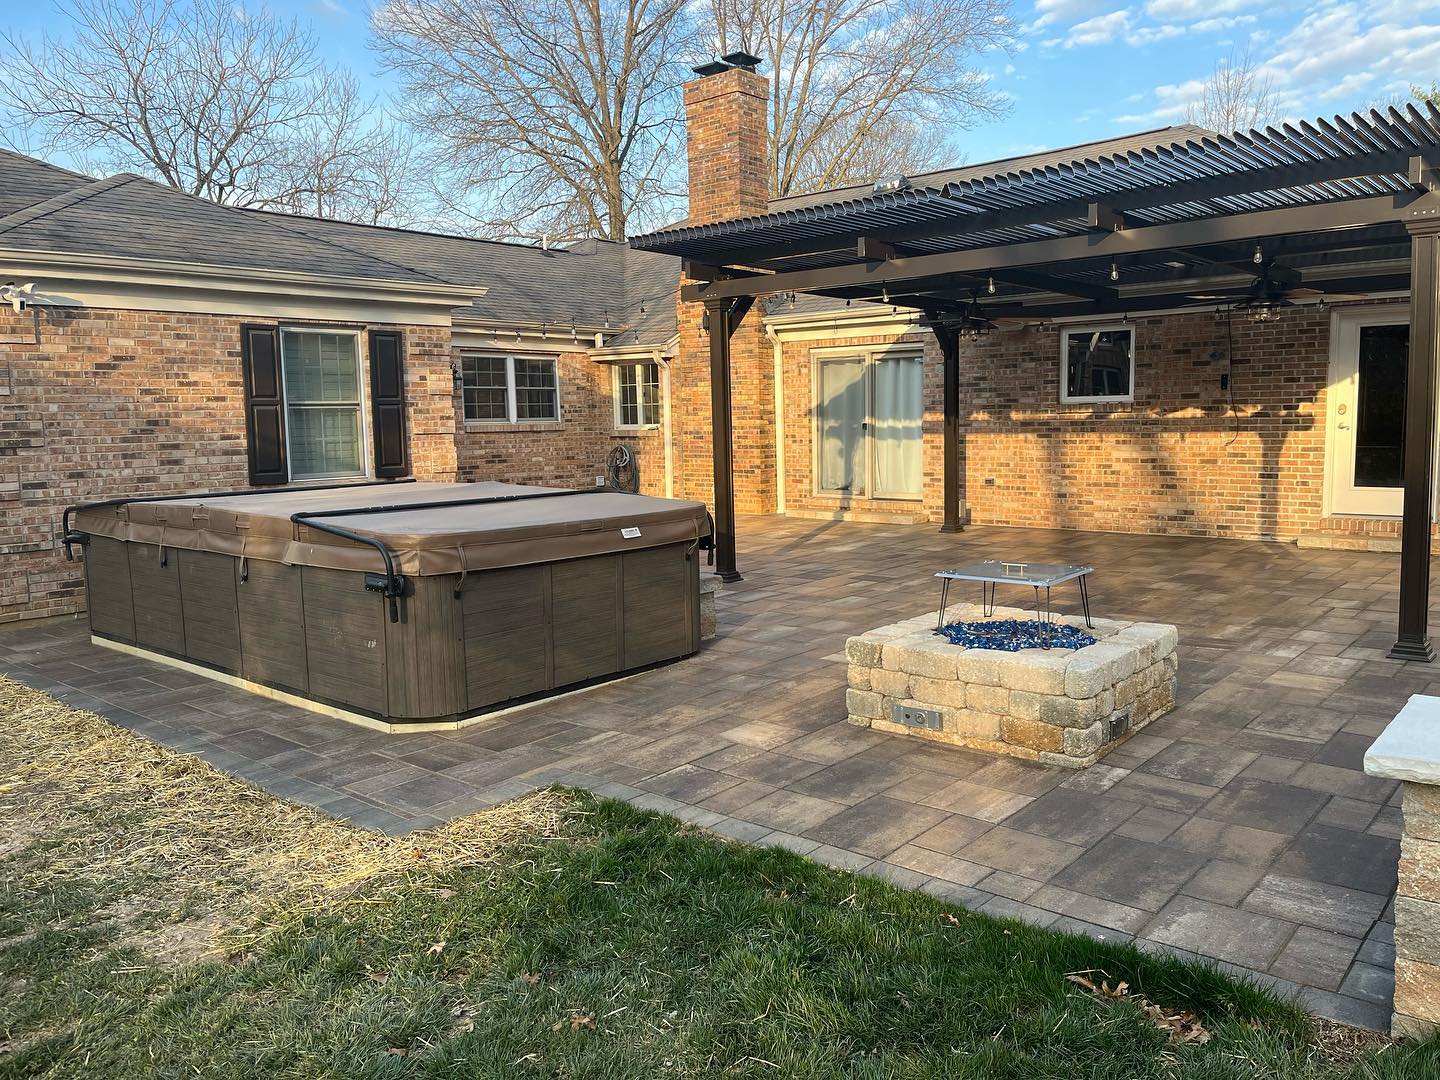 Big Bend Landscaping use your outdoor living space